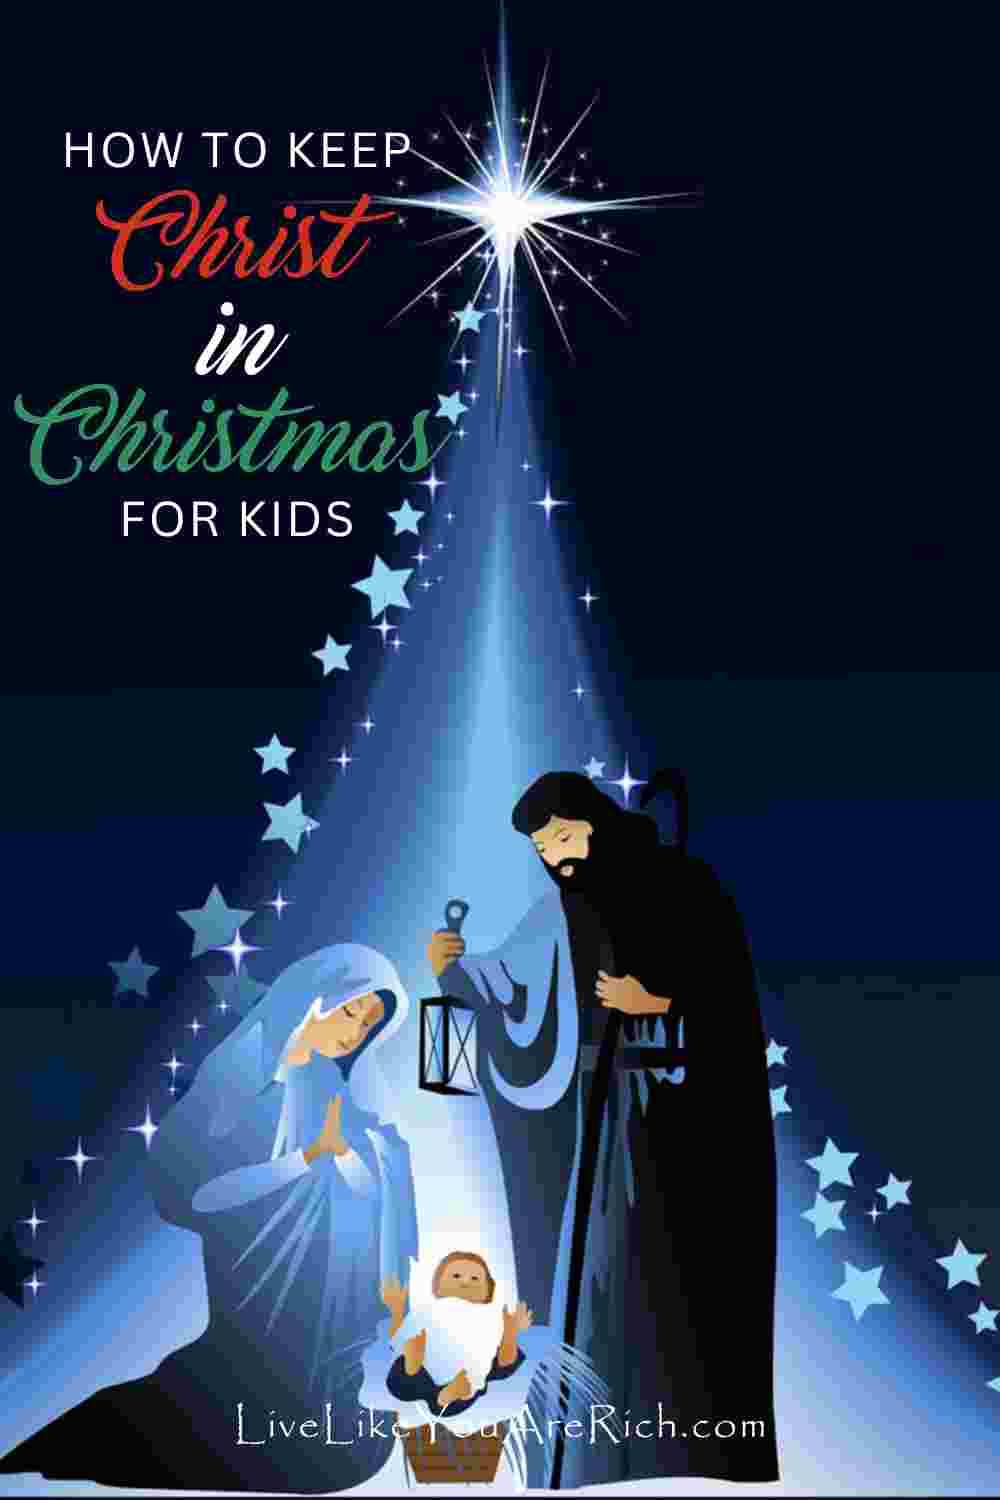 How to Keep Christ in Christmas—for Kids